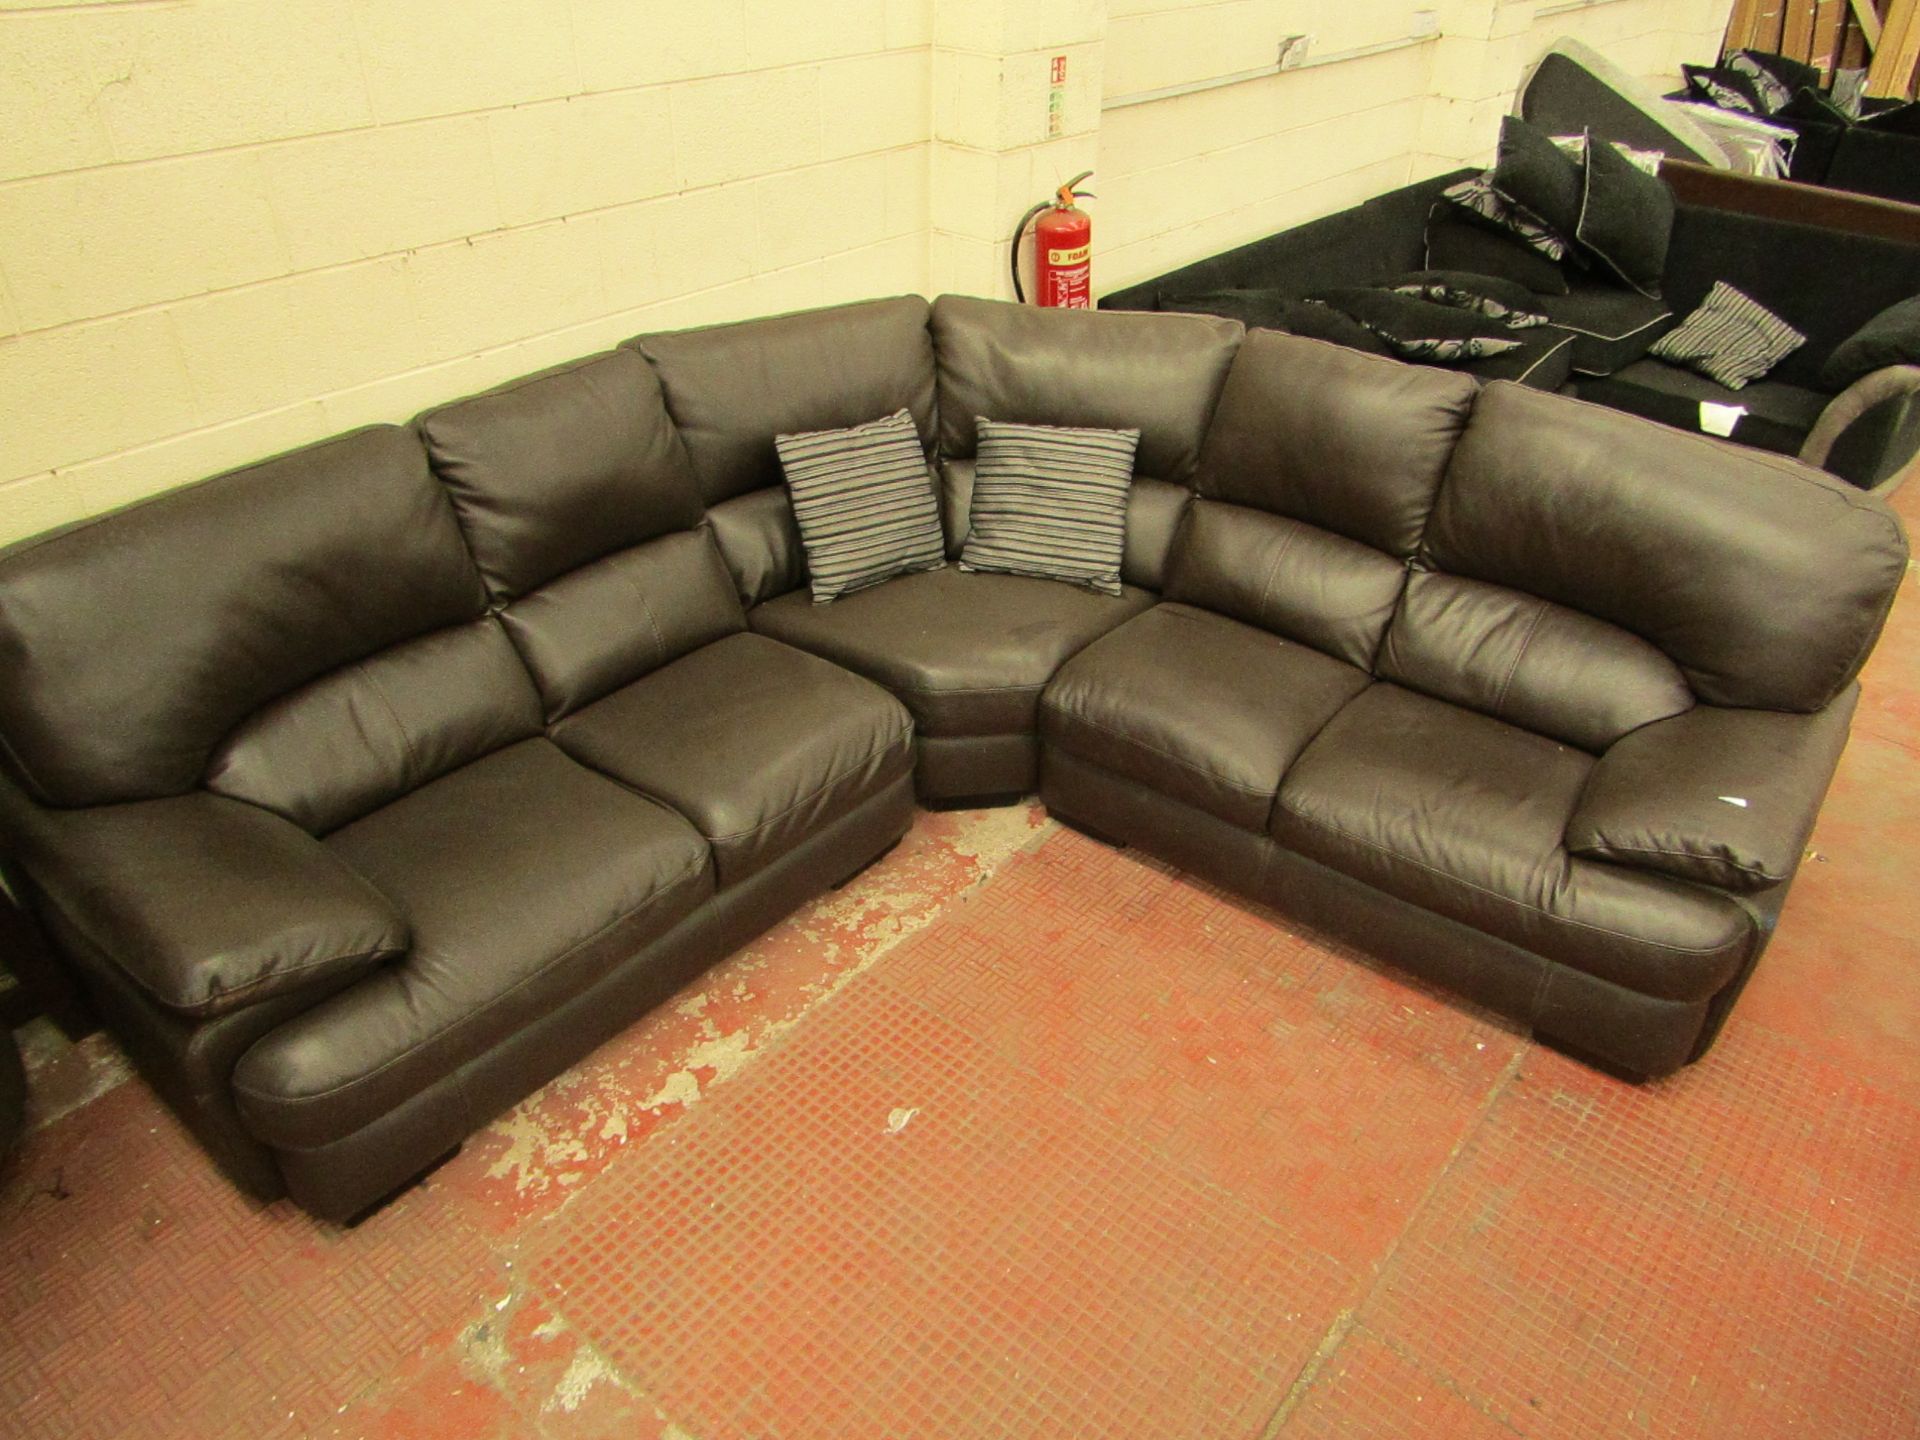 3 Piece 5 seater leather sofa with 2 cushions, minor scuff marks found on the front of one arm, this